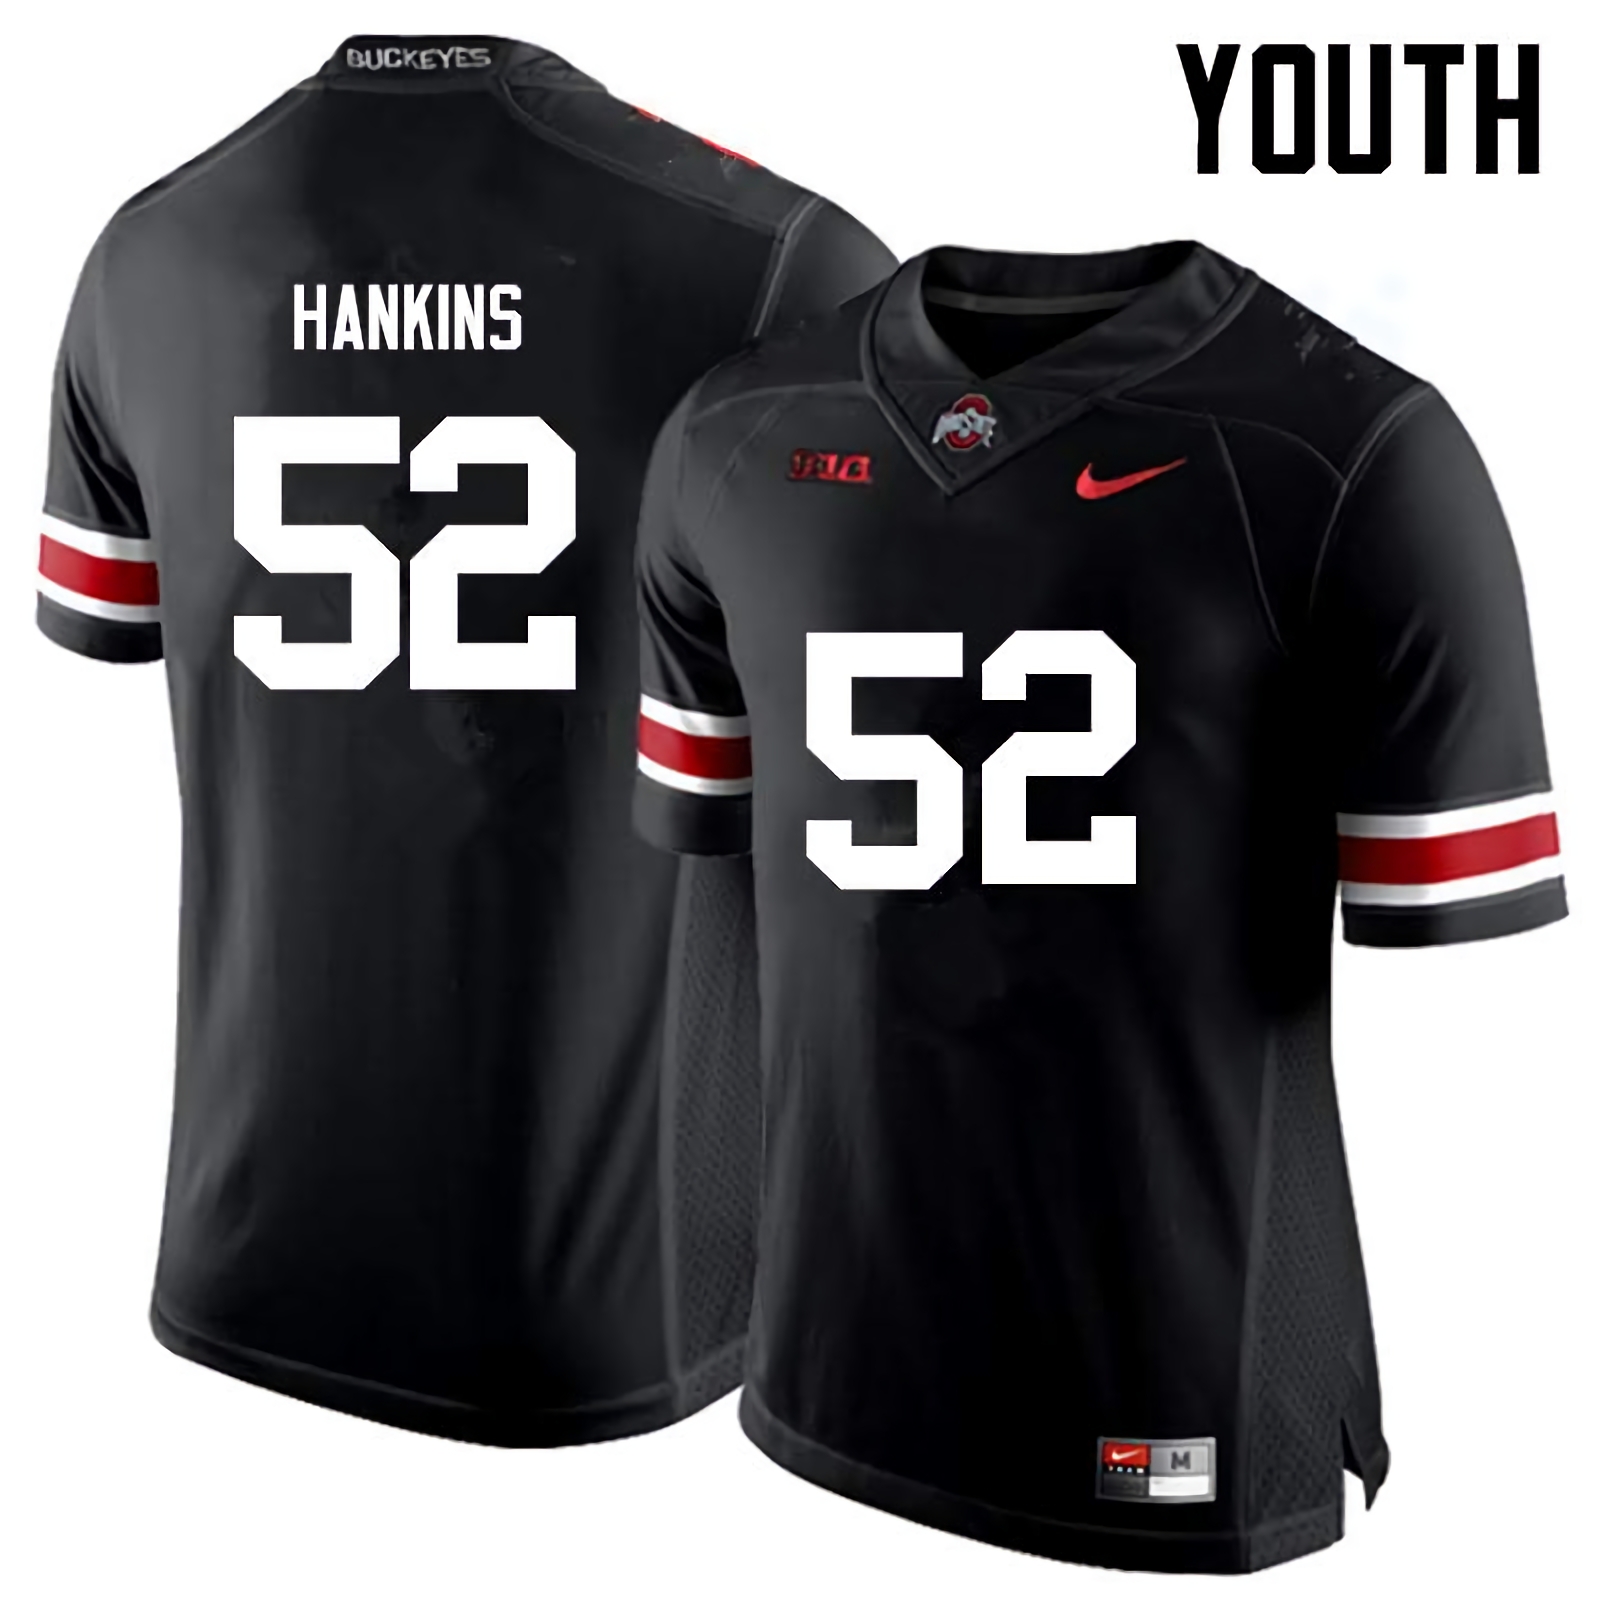 Johnathan Hankins Ohio State Buckeyes Youth NCAA #52 Nike Black College Stitched Football Jersey MKB4556PS